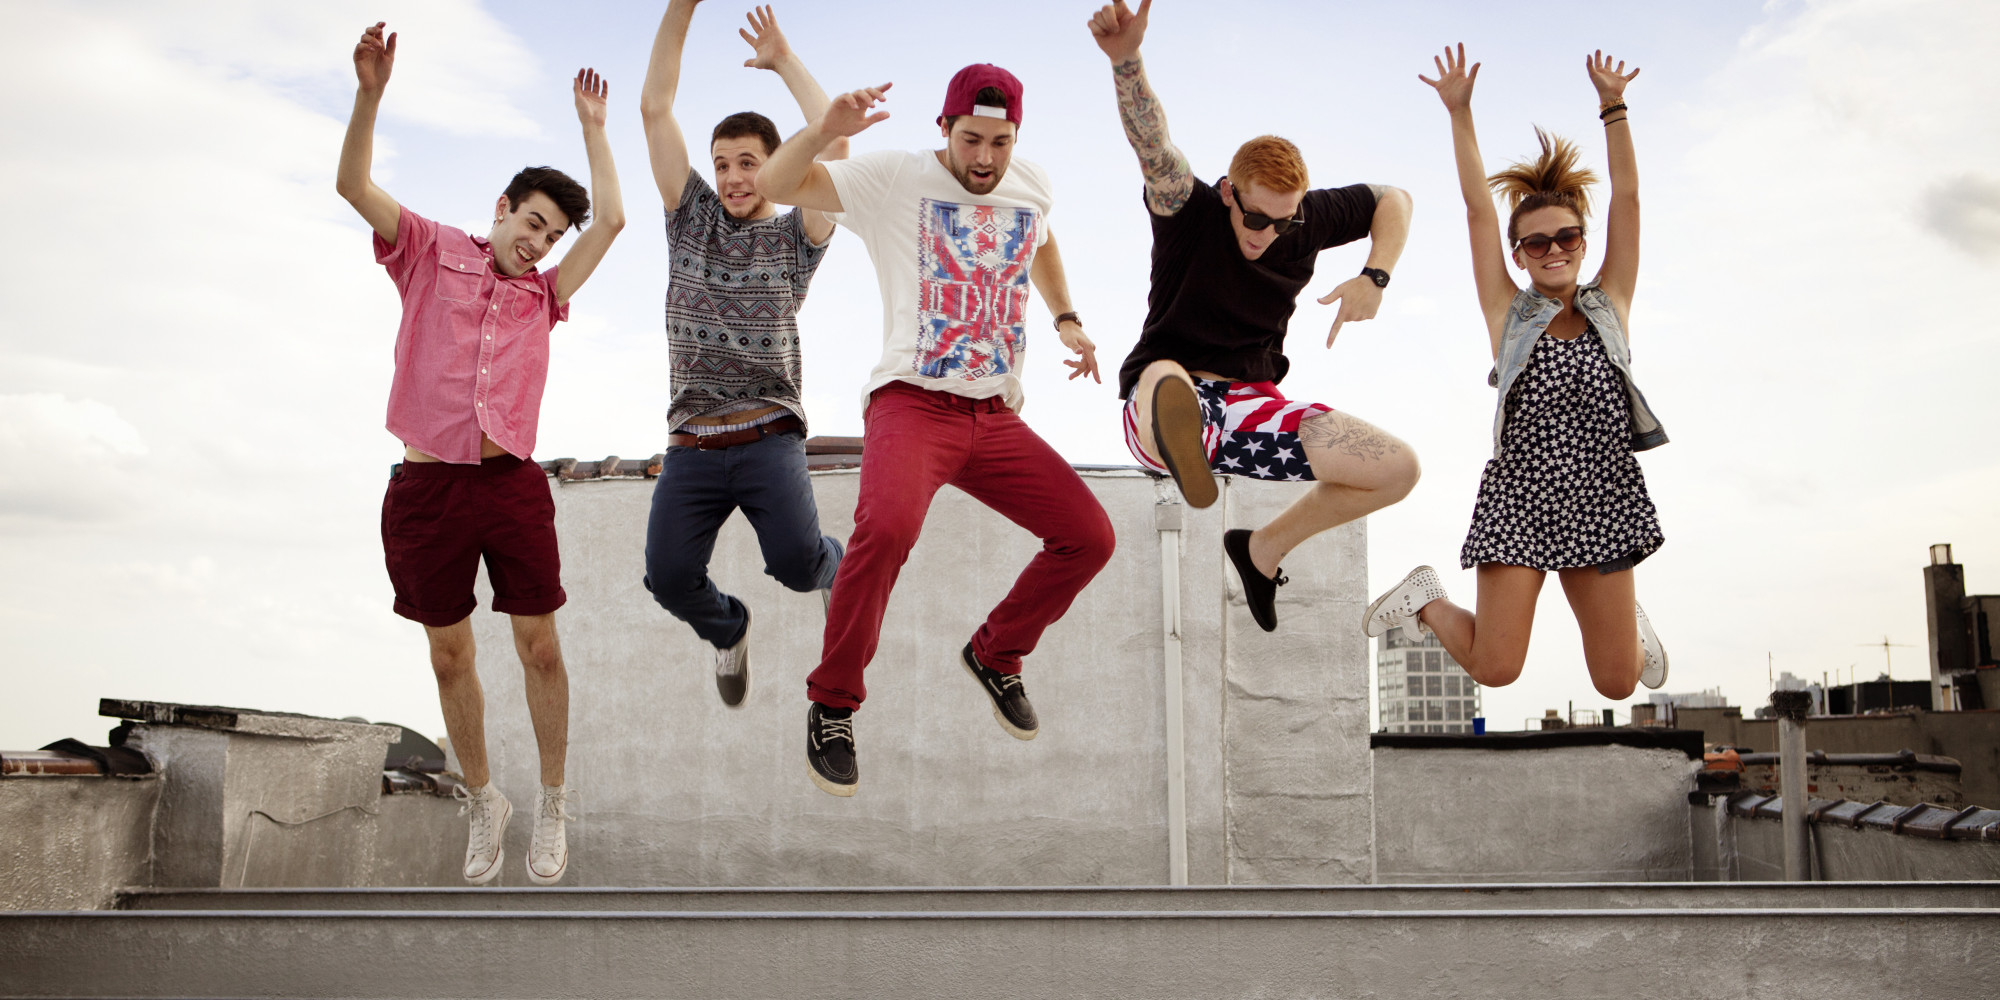 Group Of Friends Jumping Of Beam On Rooftop